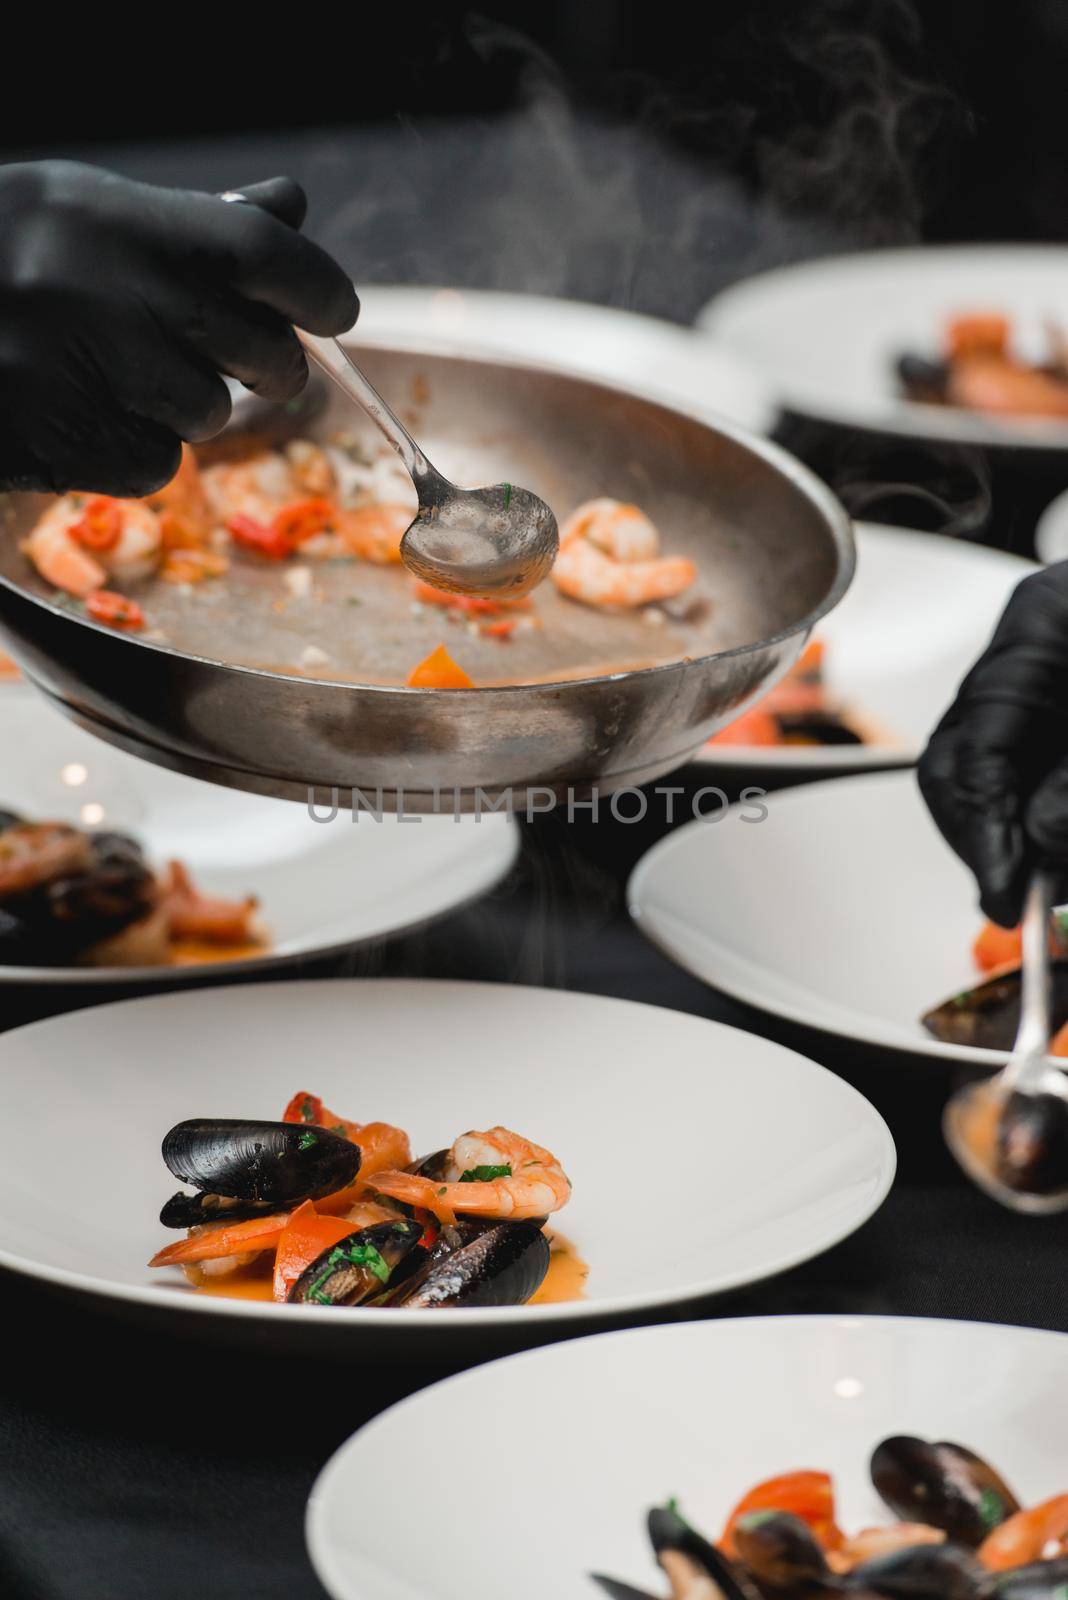 the chef prepares a seafood dish